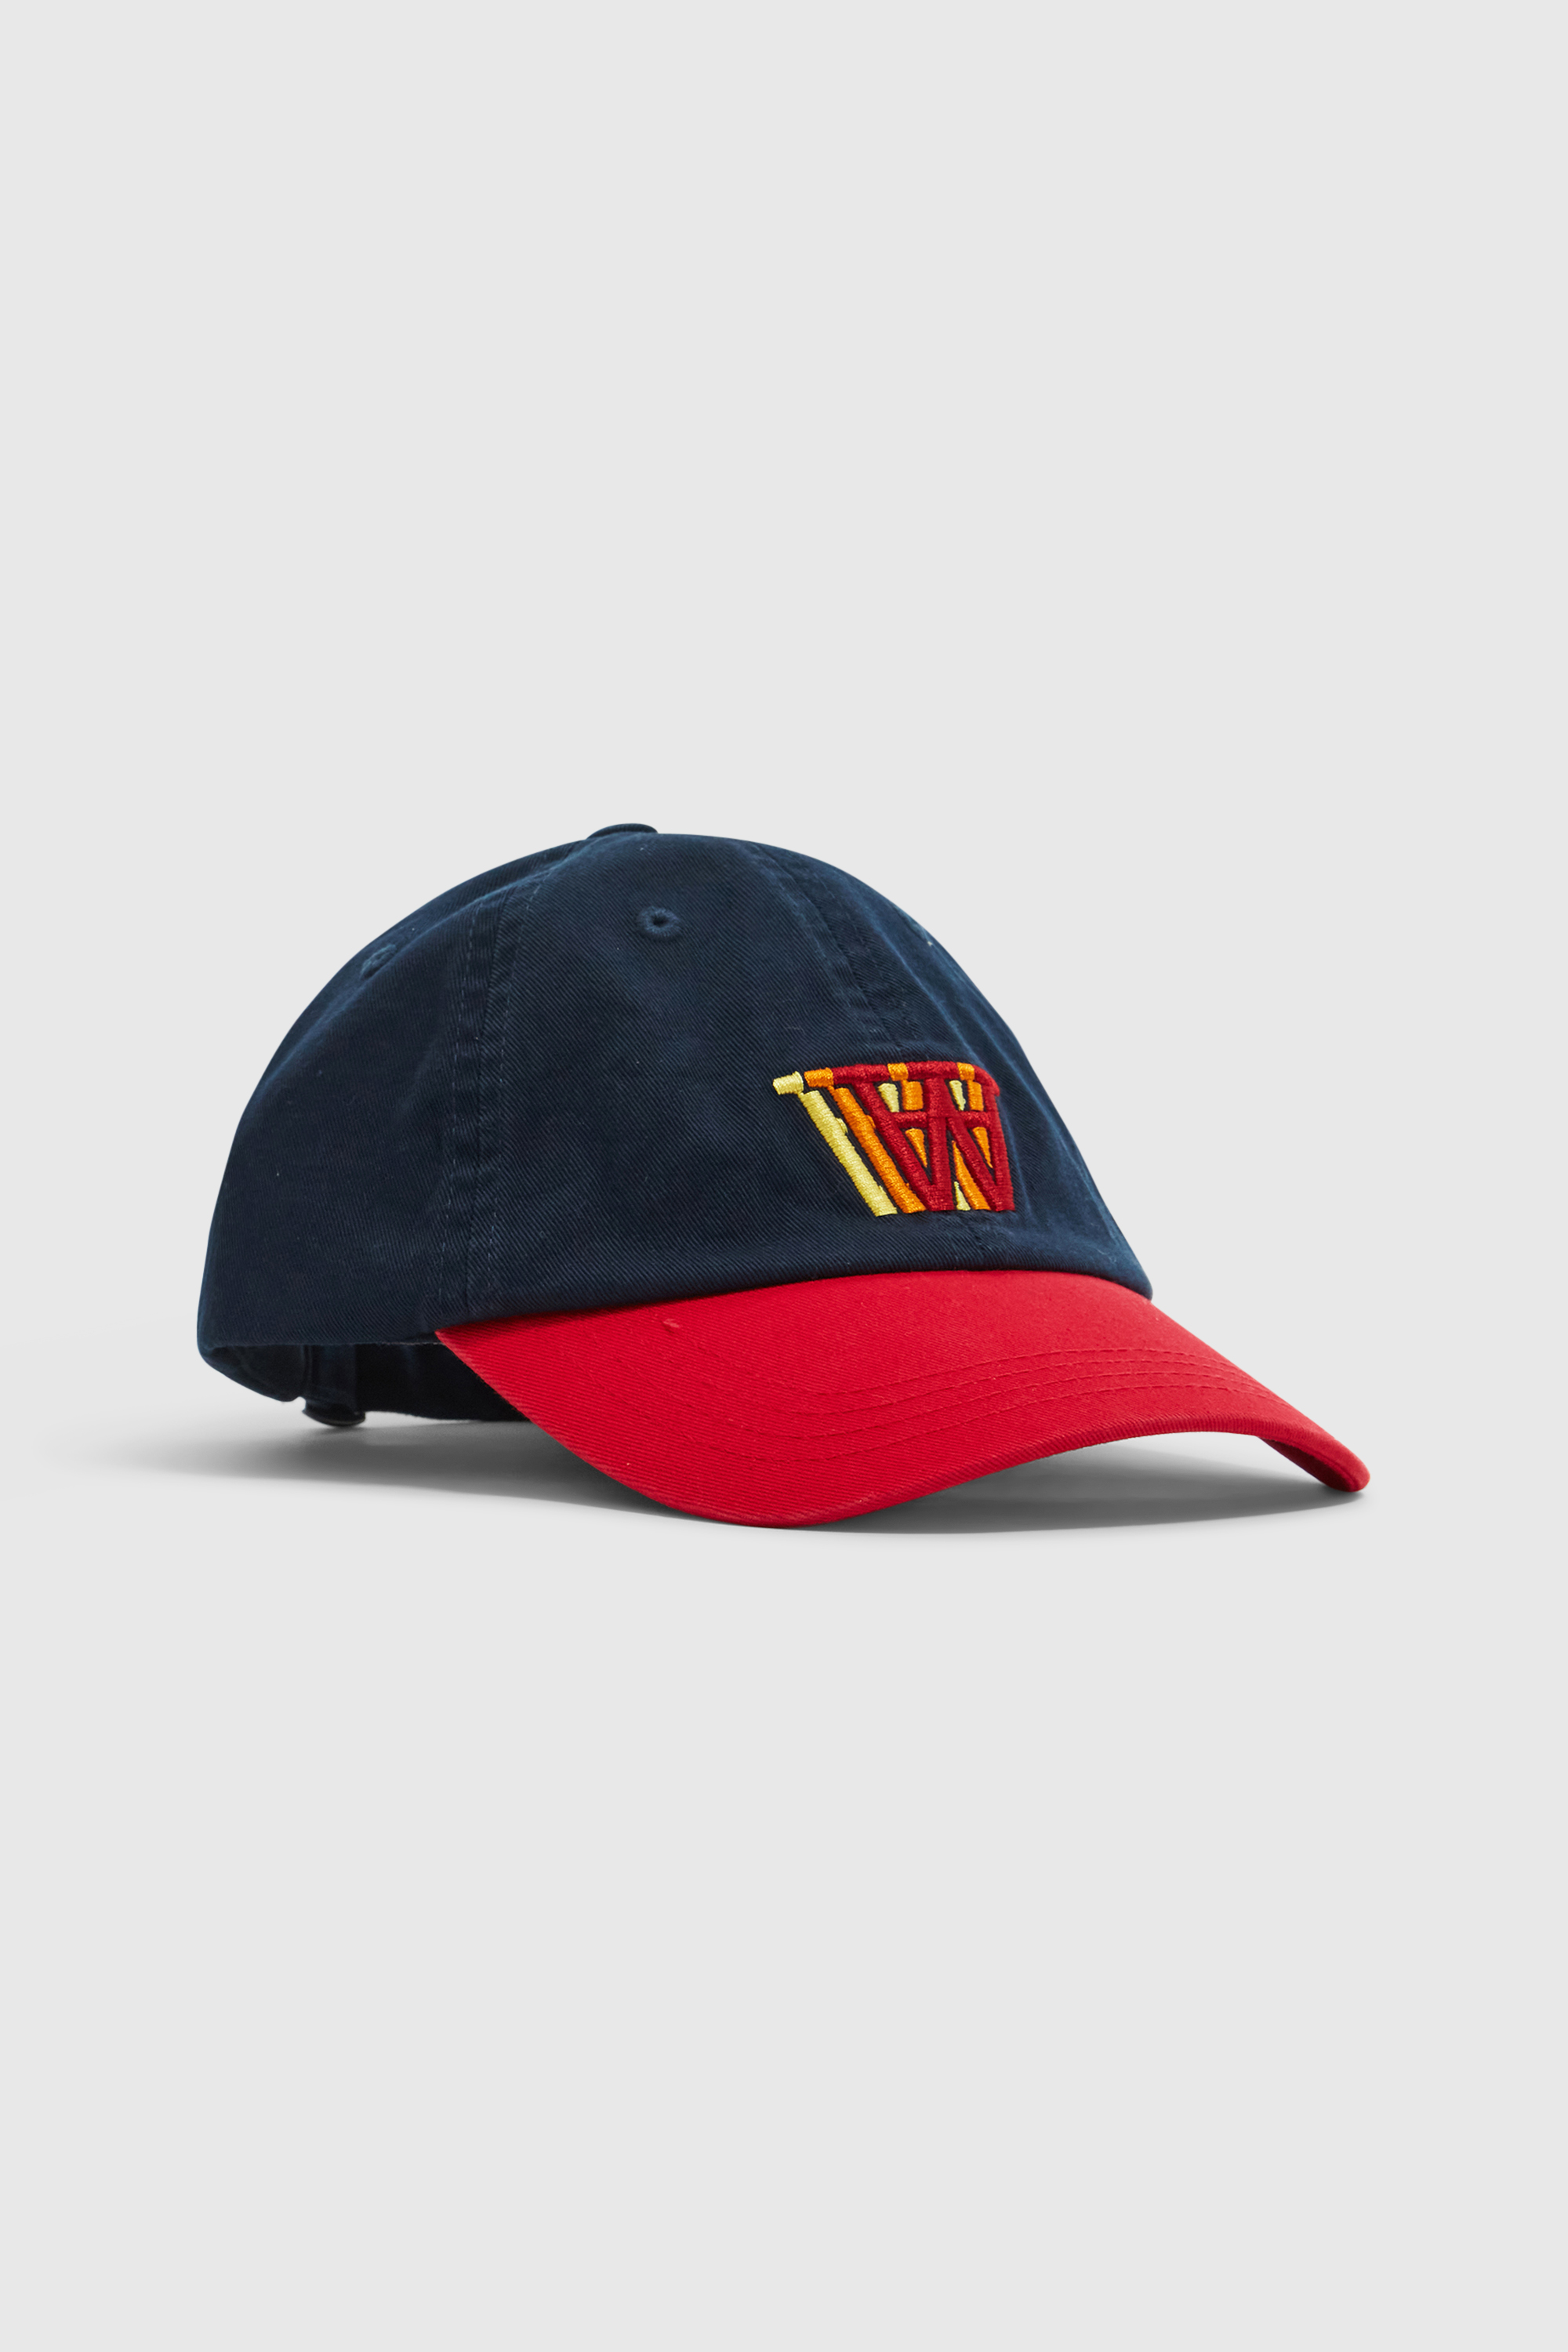 Double A by Wood two-tone Wood AA Navy cap Eli